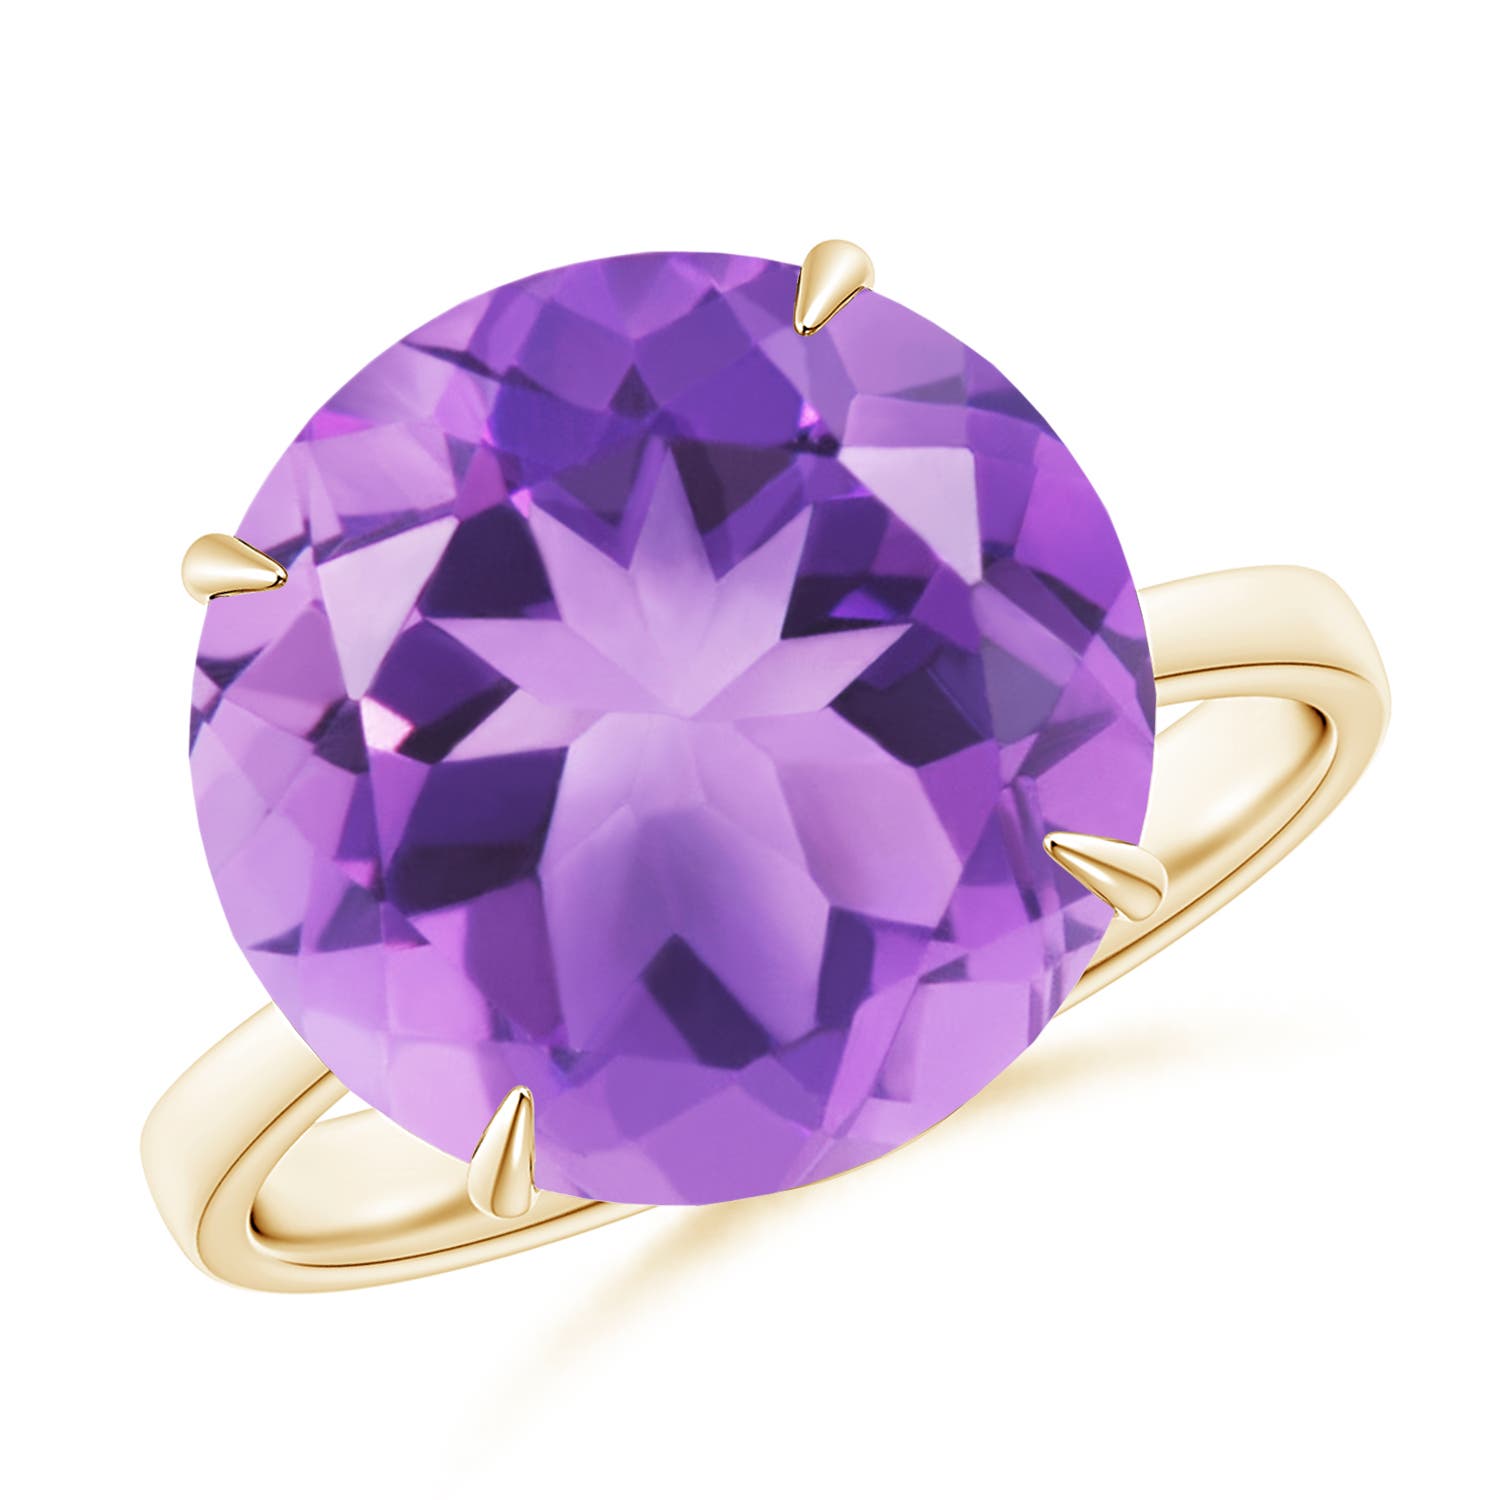 A- Amethyst / 7.2 CT / 14 KT Yellow Gold